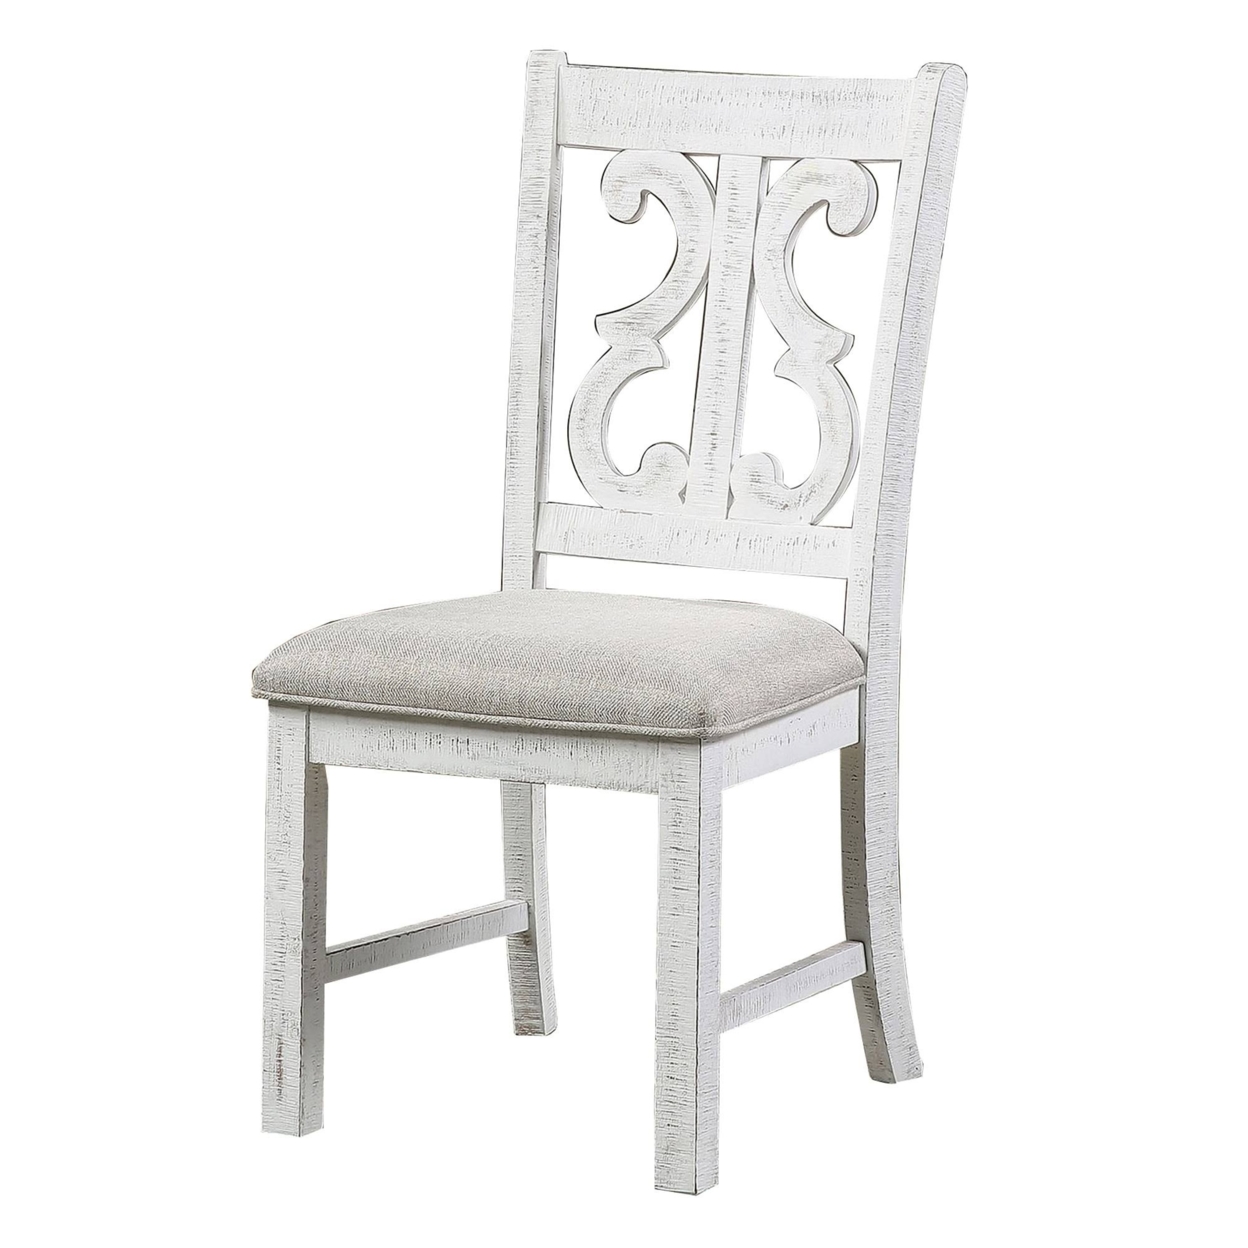 Neci 23 Inch Wood Dining Chair, Set Of 2, Carved Back, Padded Seat, White